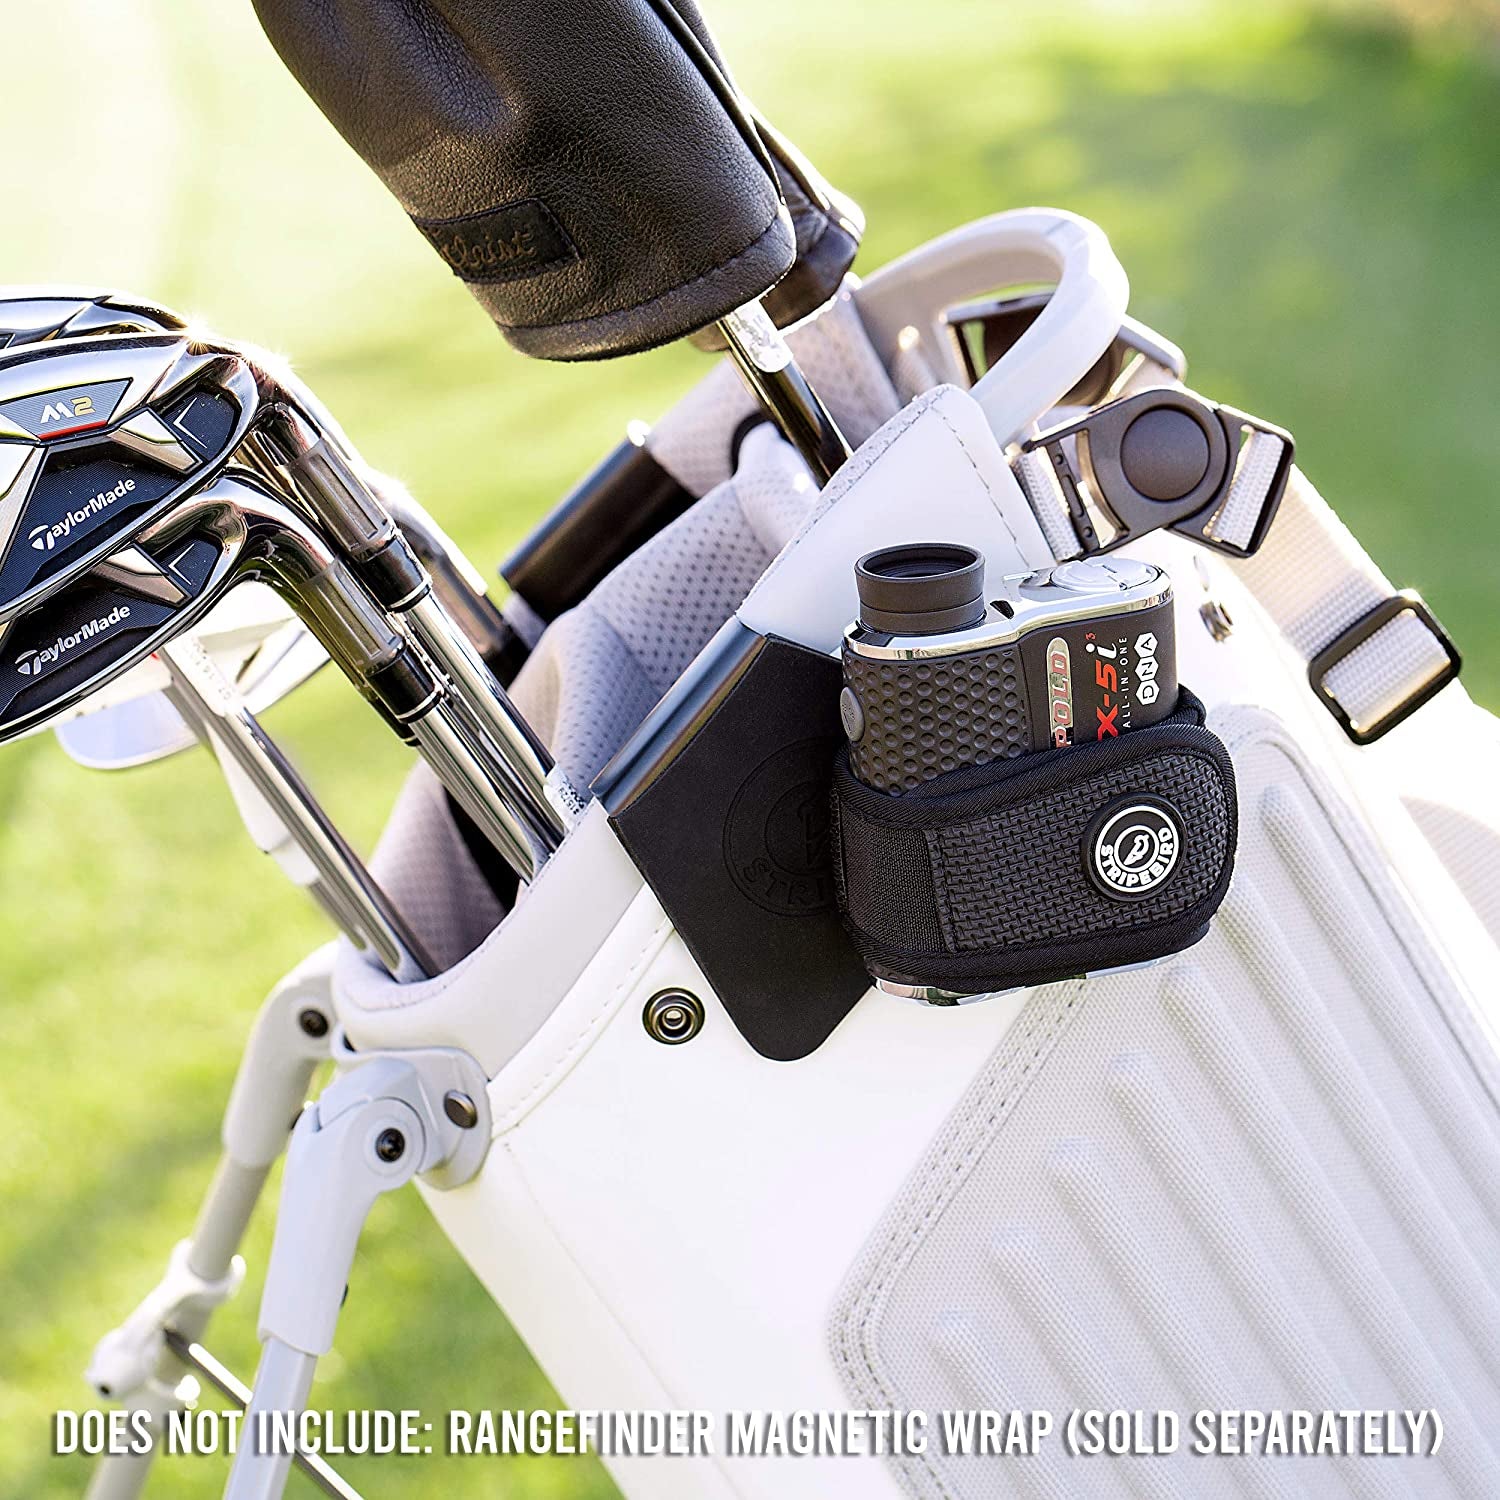 - Golf Hub for Magnetic Accessories - Golf Bag Attachment for Magnetic Products - Easily Access Magnetic Golf Accessories from Your Golf Bag…